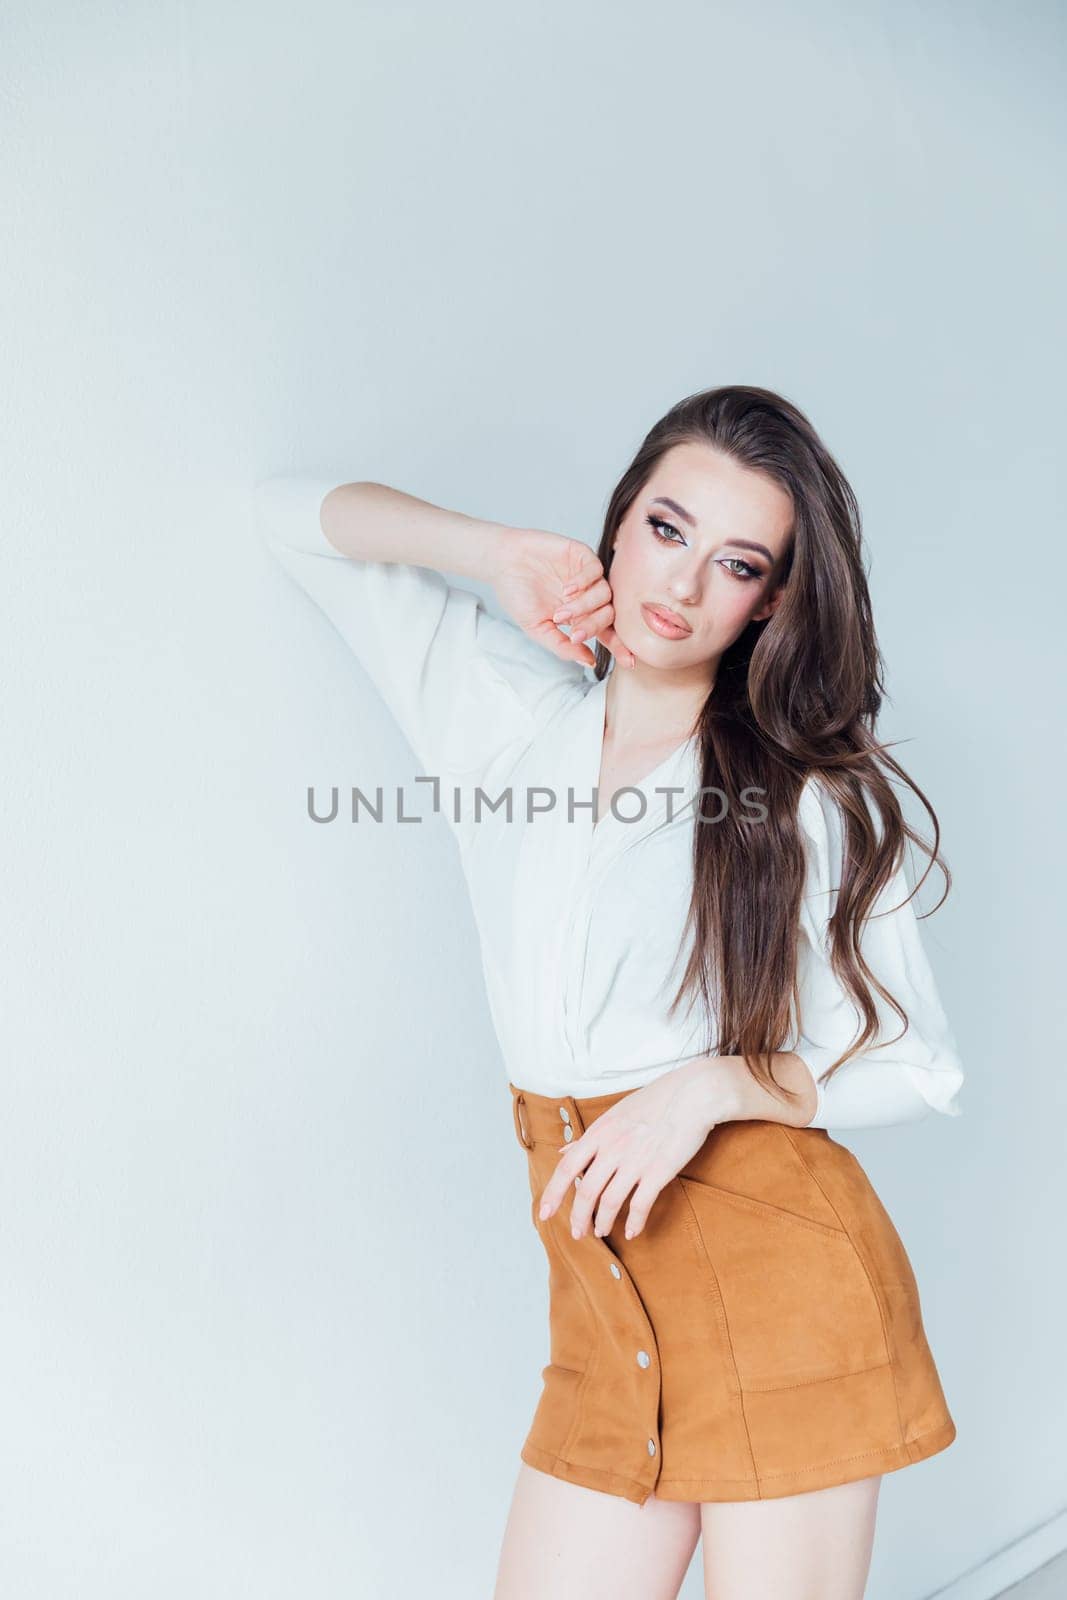 fashionable woman in blouse and yellow skirt on white background by Simakov